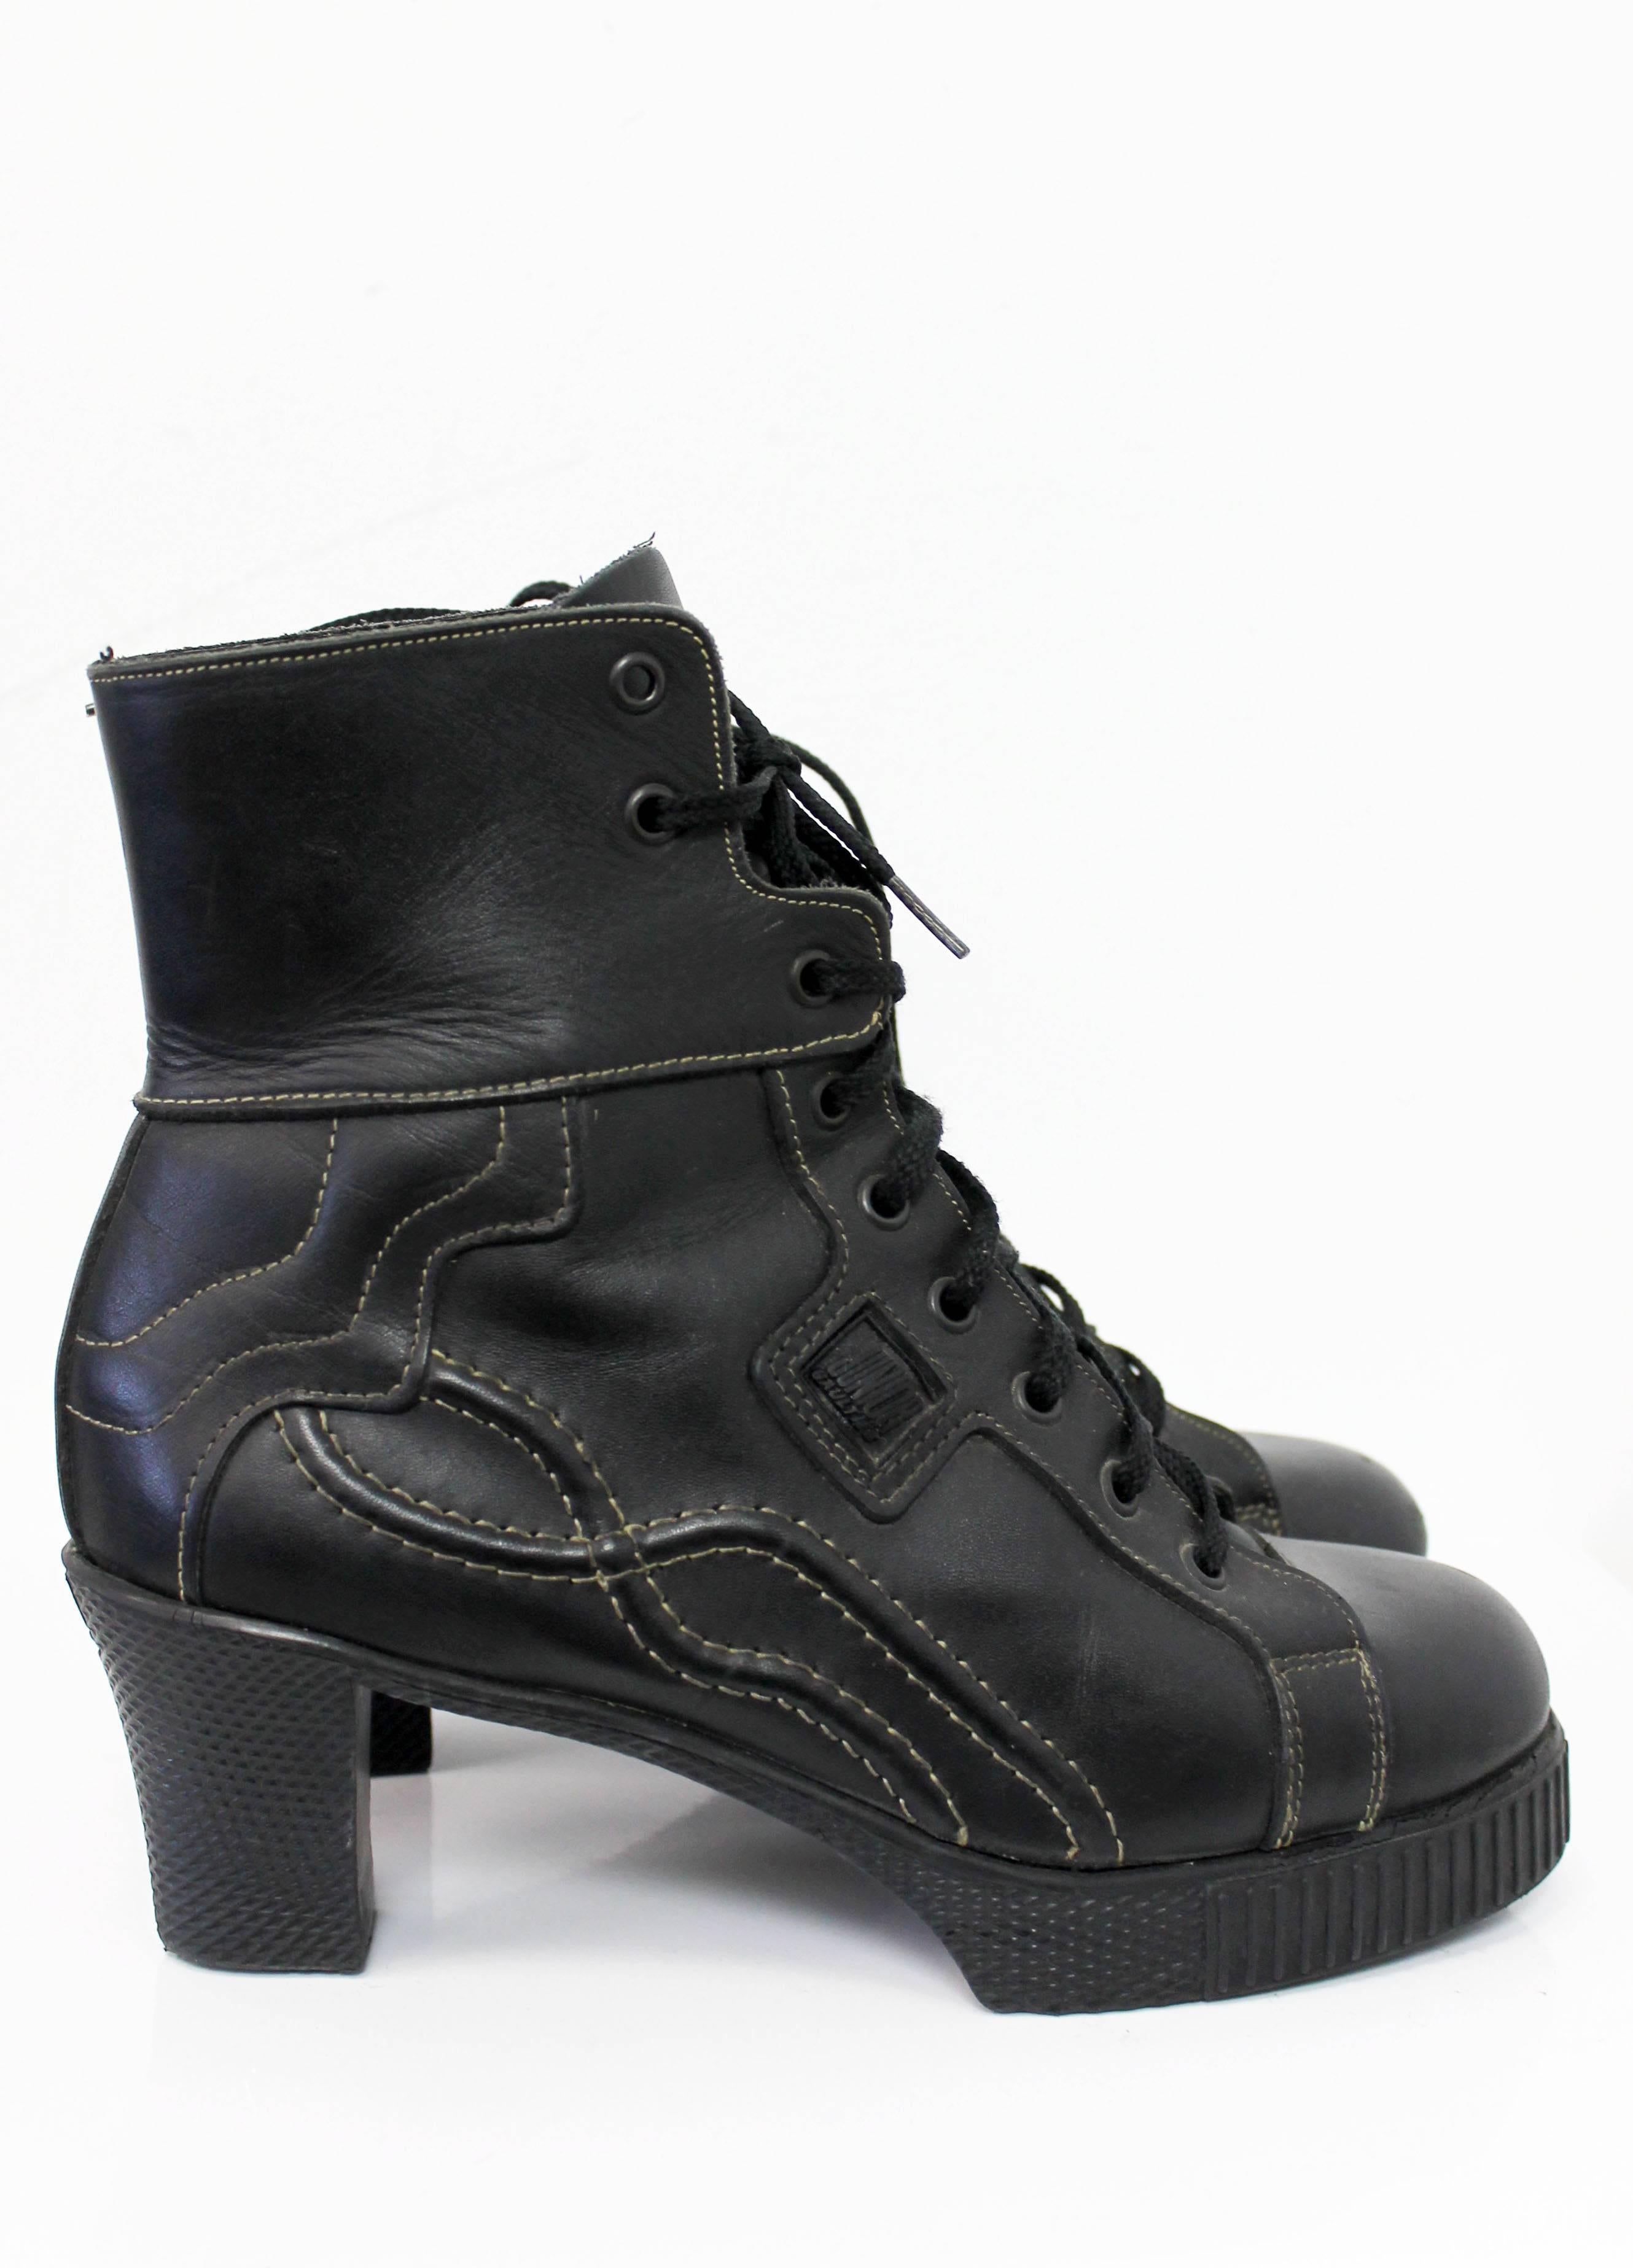 Junior Gaultier Black Lace-Up Boots c. 1990 In Good Condition For Sale In London, GB